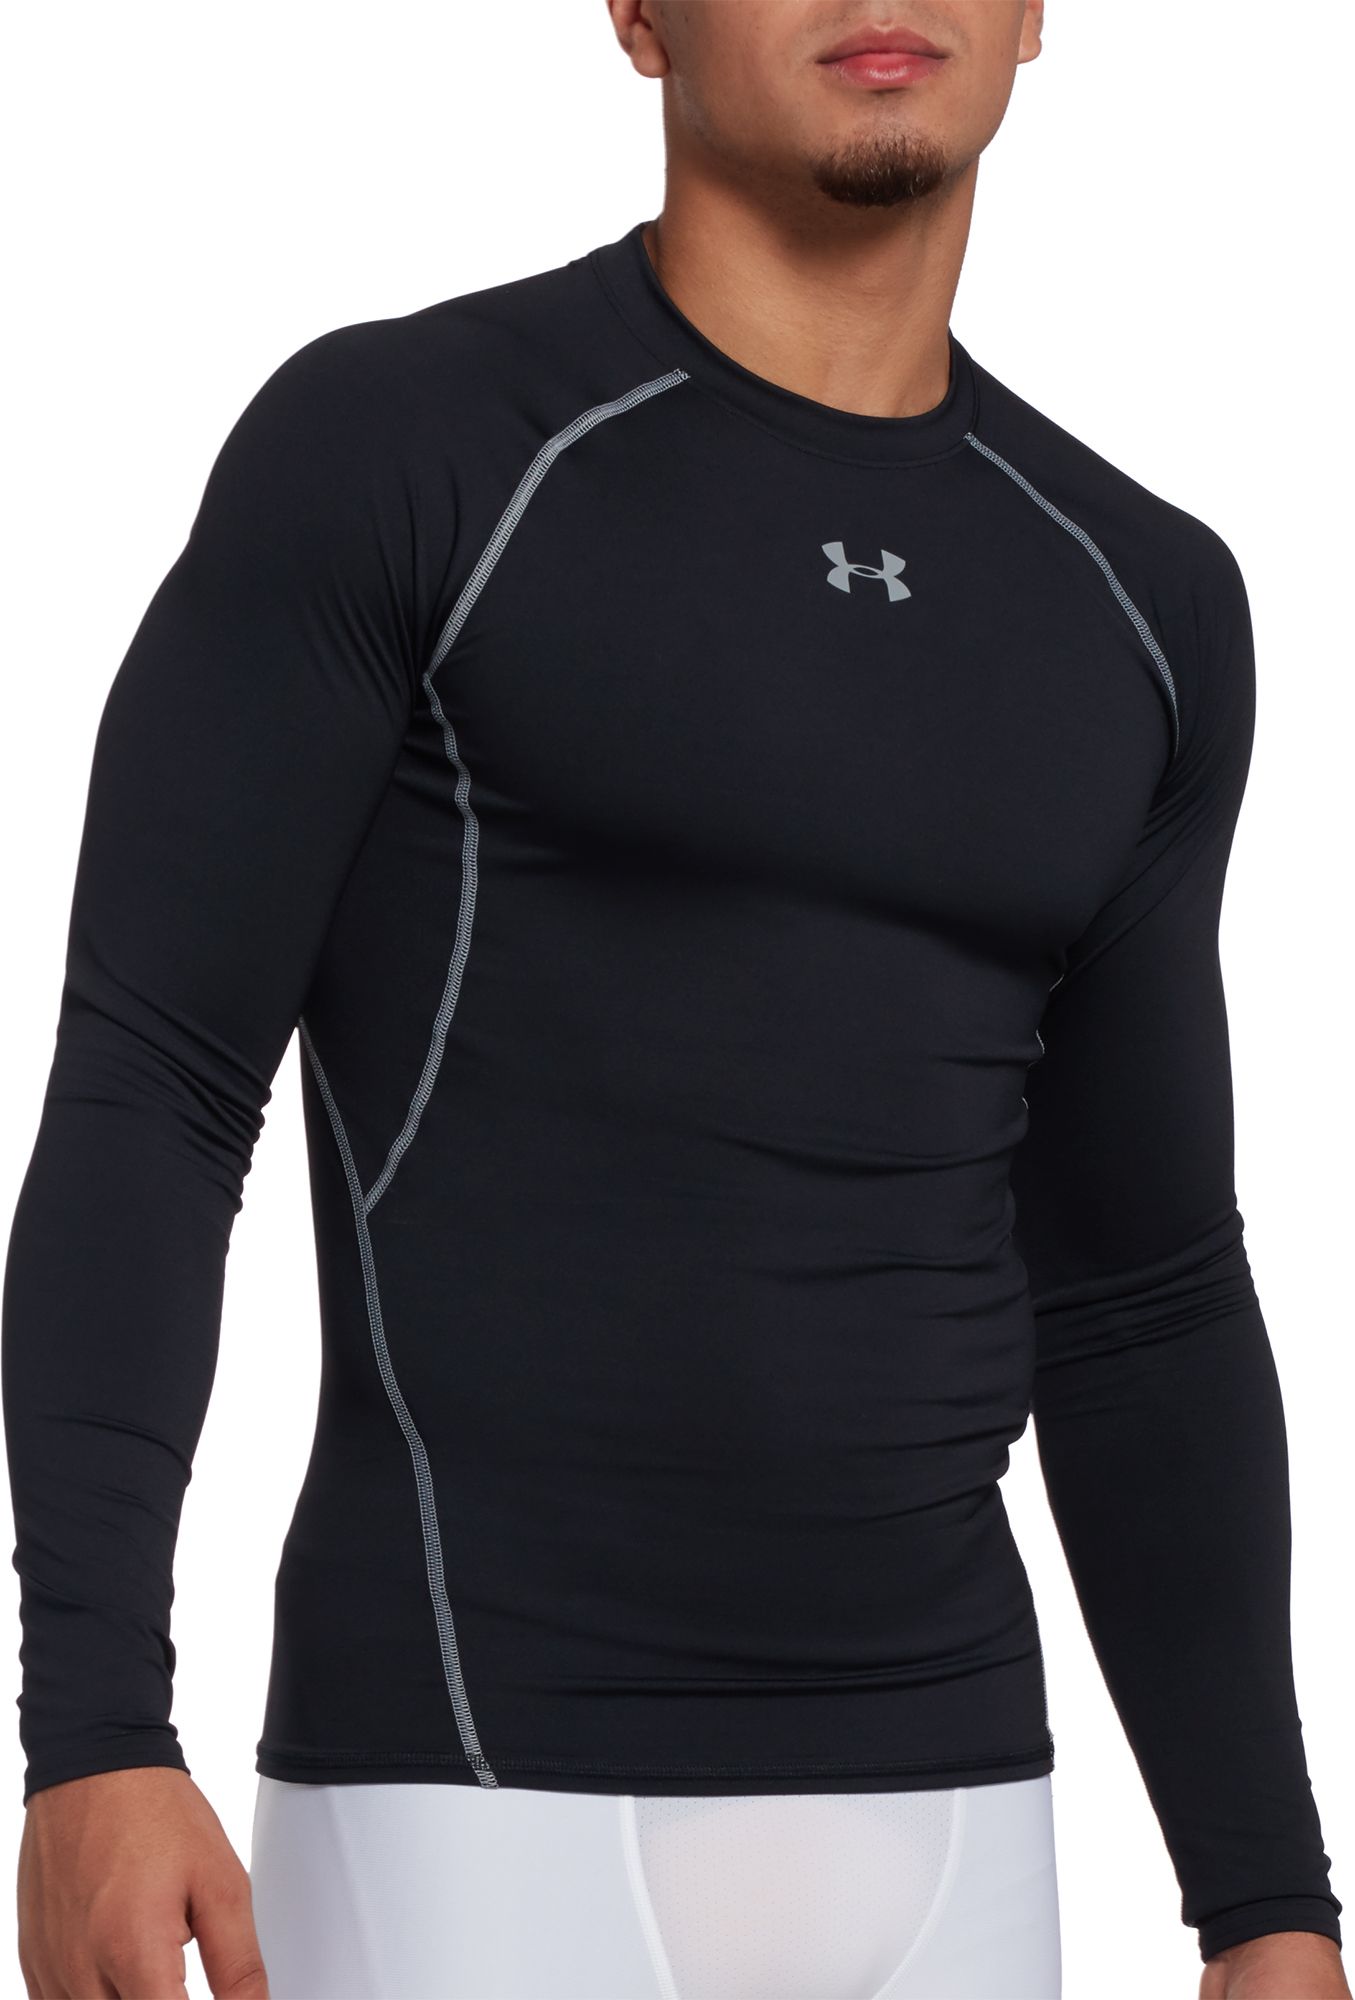 Under Armour UA HeatGear Long Sleeved Green Sports Functional Compression Top 